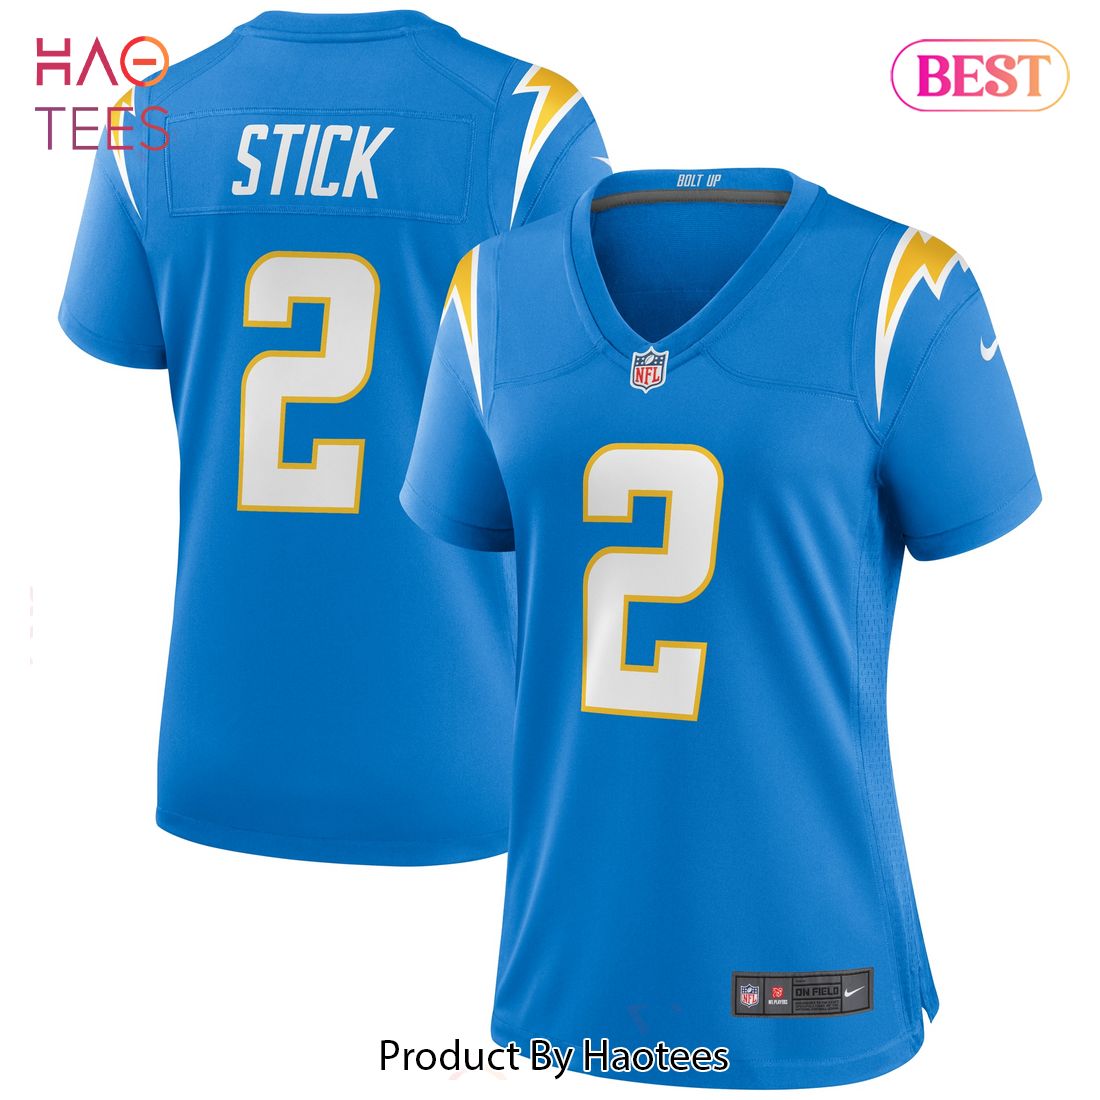 Easton Stick Los Angeles Chargers Nike Women's Game Jersey Powder Blue